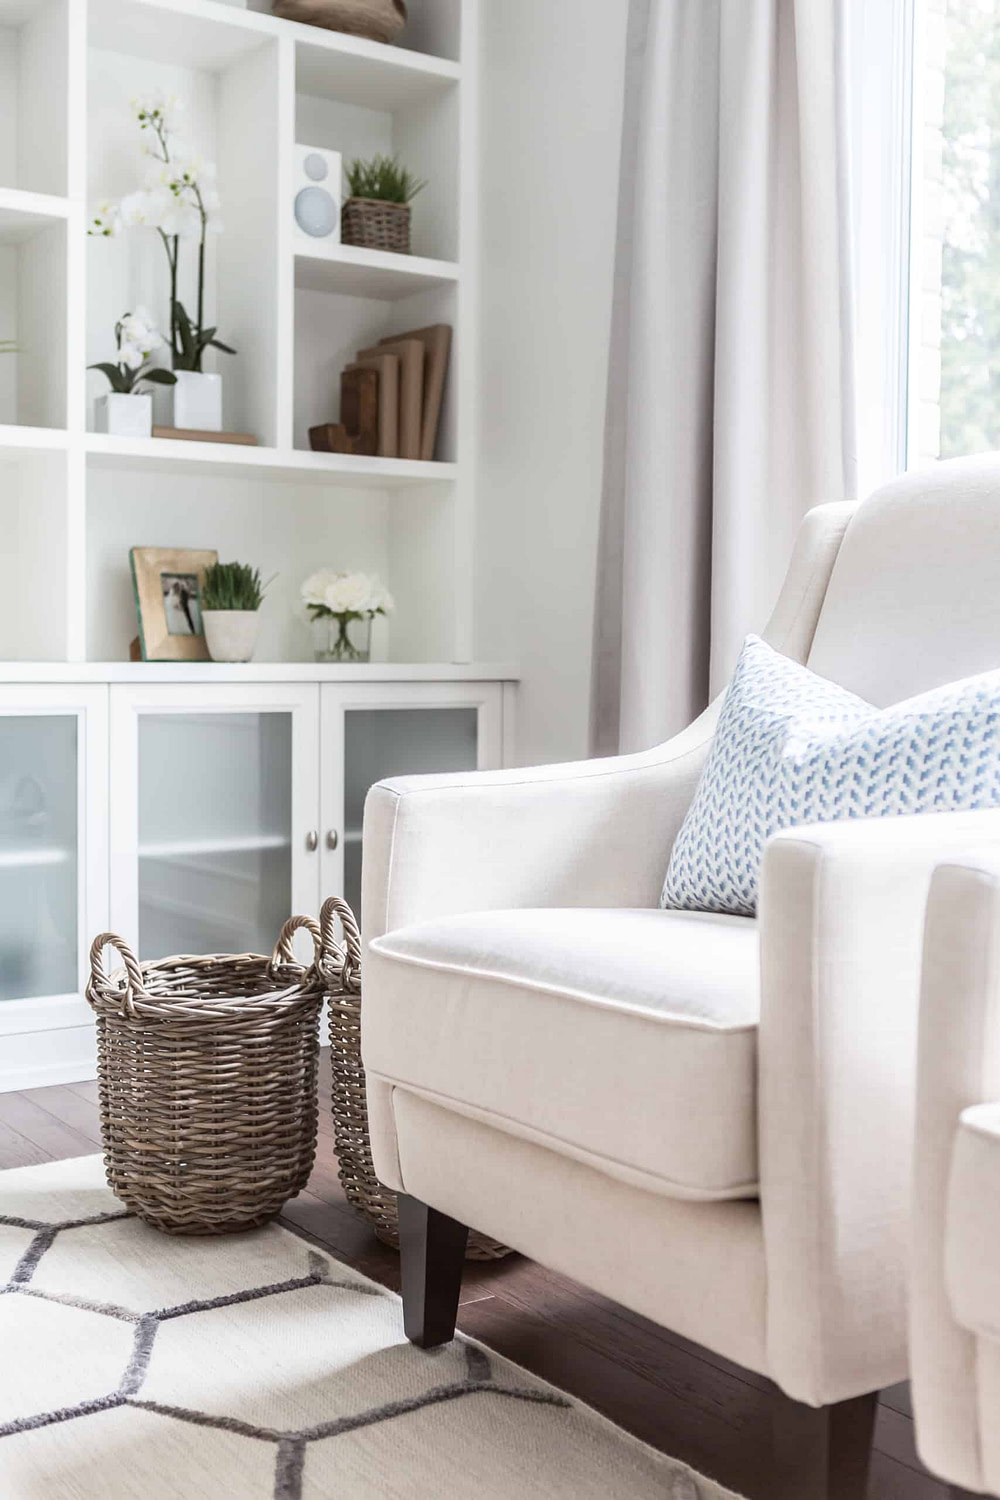 White chair with two baskets next to it